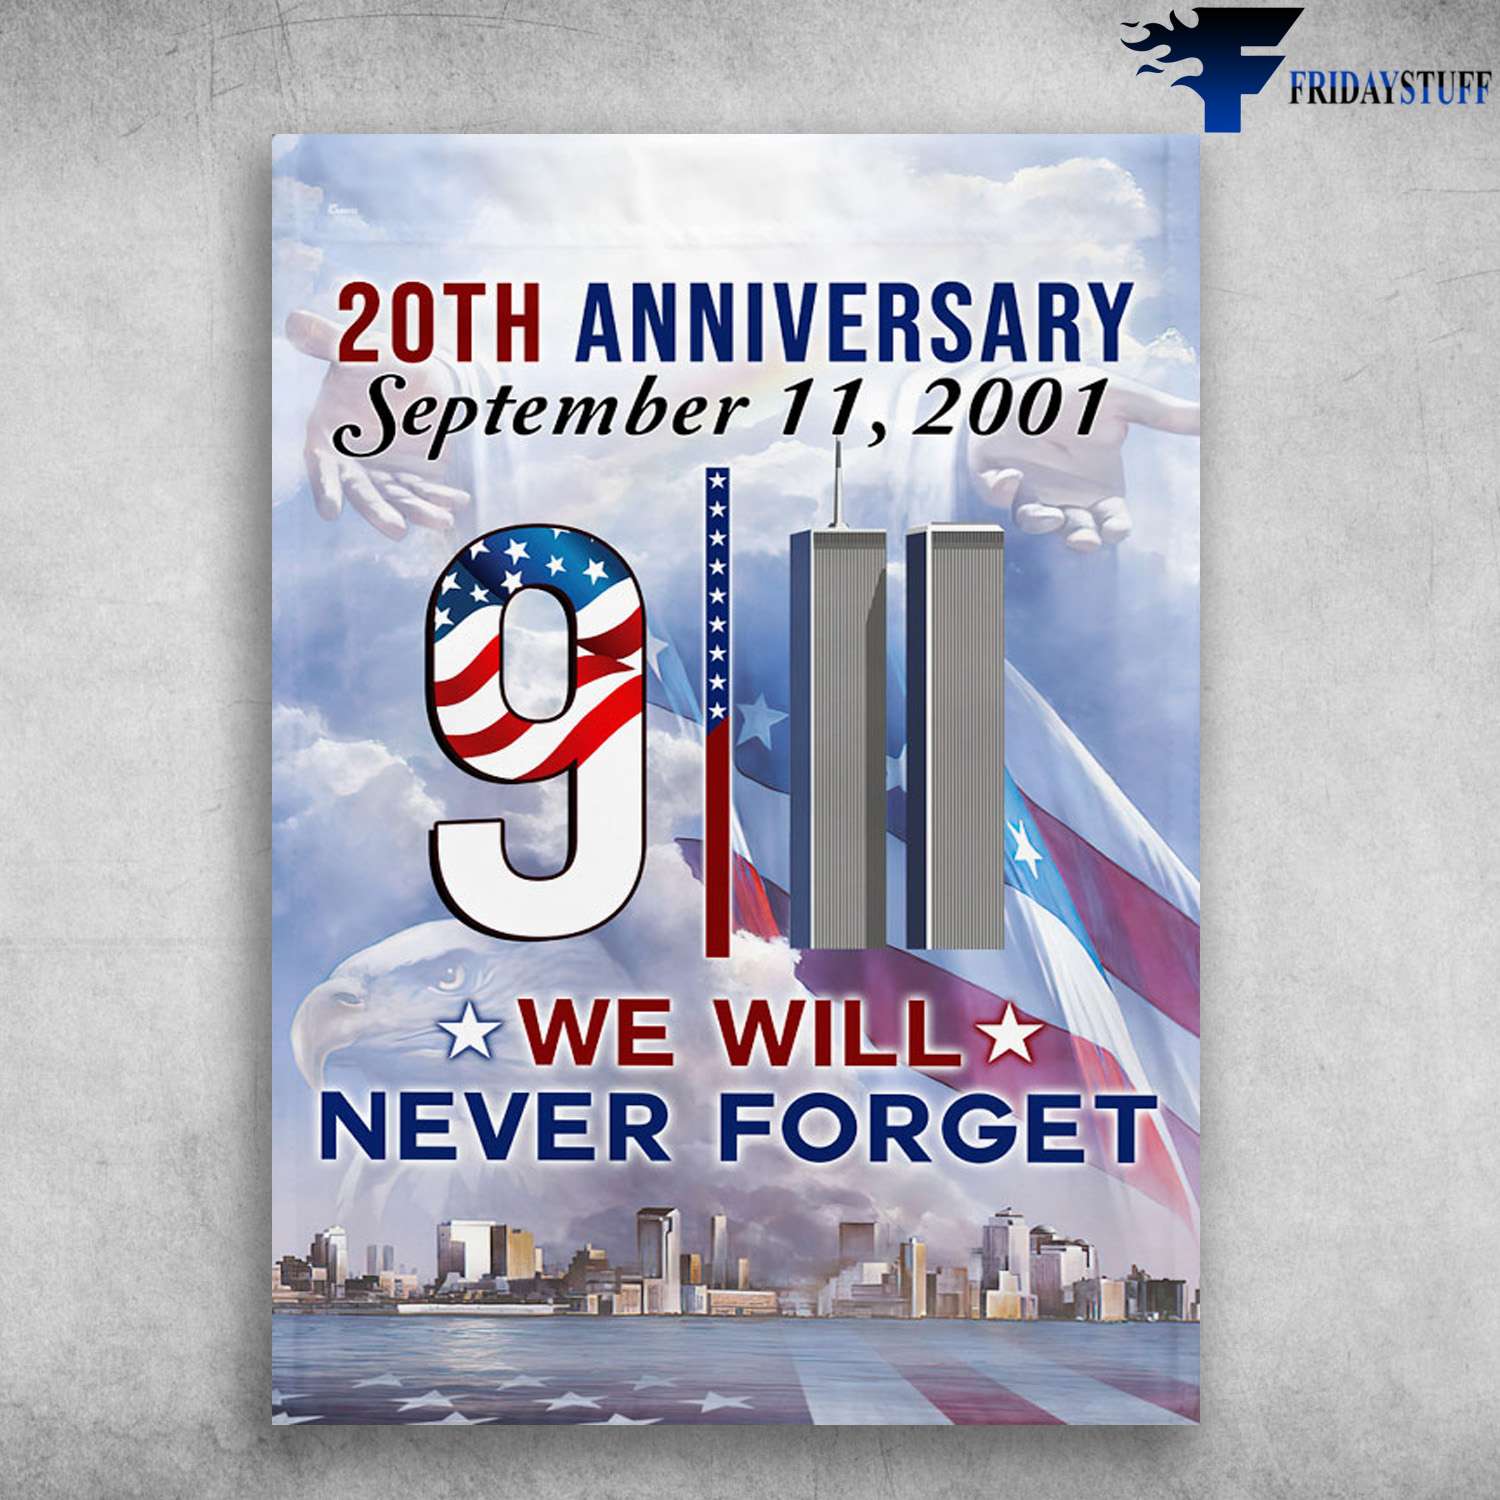 The September 11 attacks - We Will Never Forget, 20th Anniversary September 11 2001